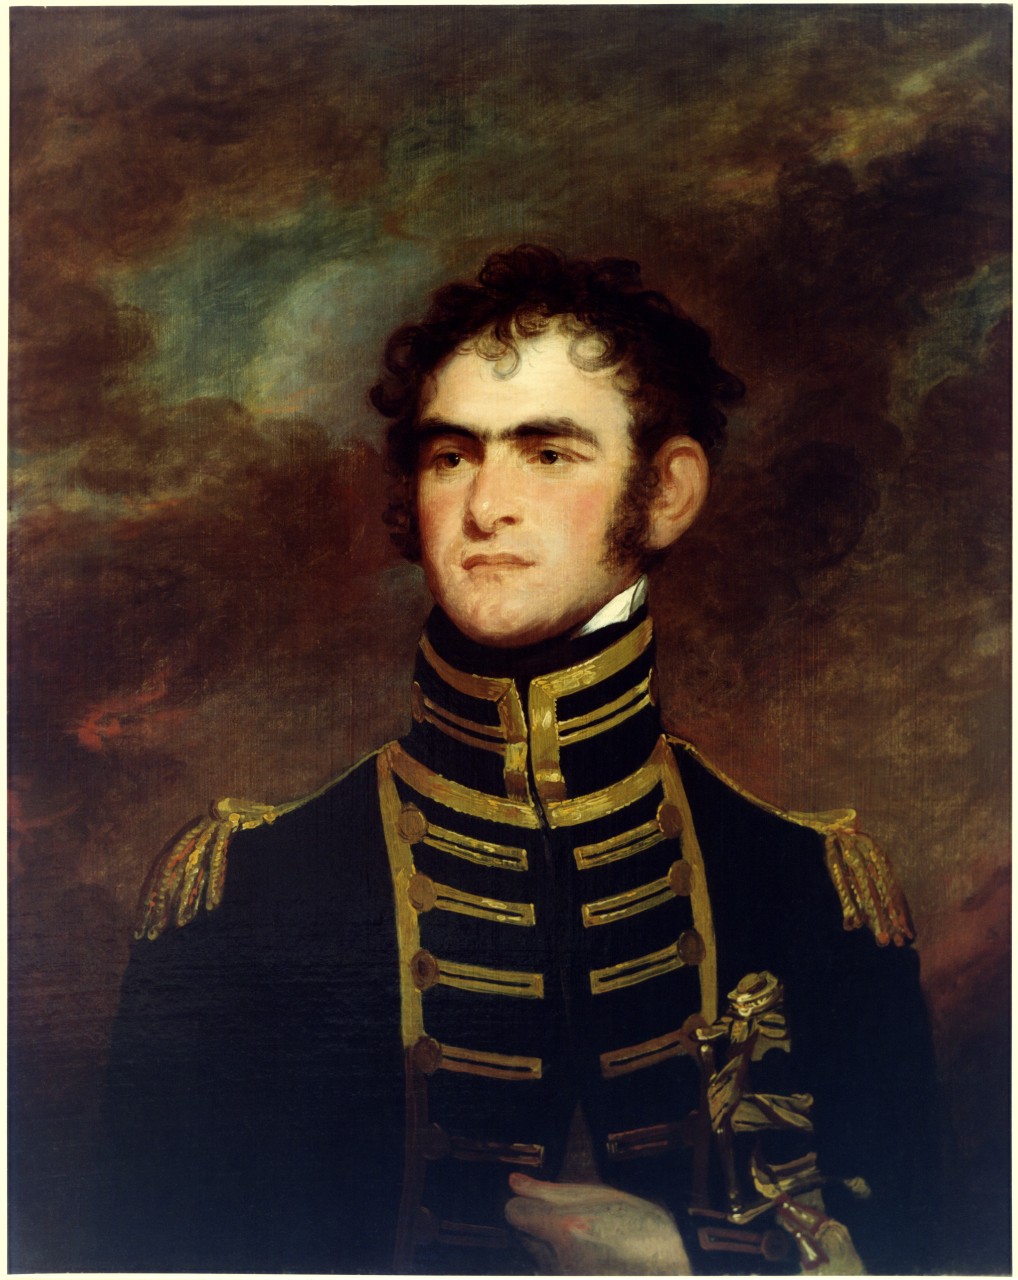 Undated oil portrait of Commodore John Rodgers, USN, by Gilbert Stuart. Courtesy of the U.S. Navy Art Collection, Washington, D.C. Donation of Mrs. Robert Giles and Miss Nannie Macomb, 1946. (Naval History and Heritage Command photo KN-13109)